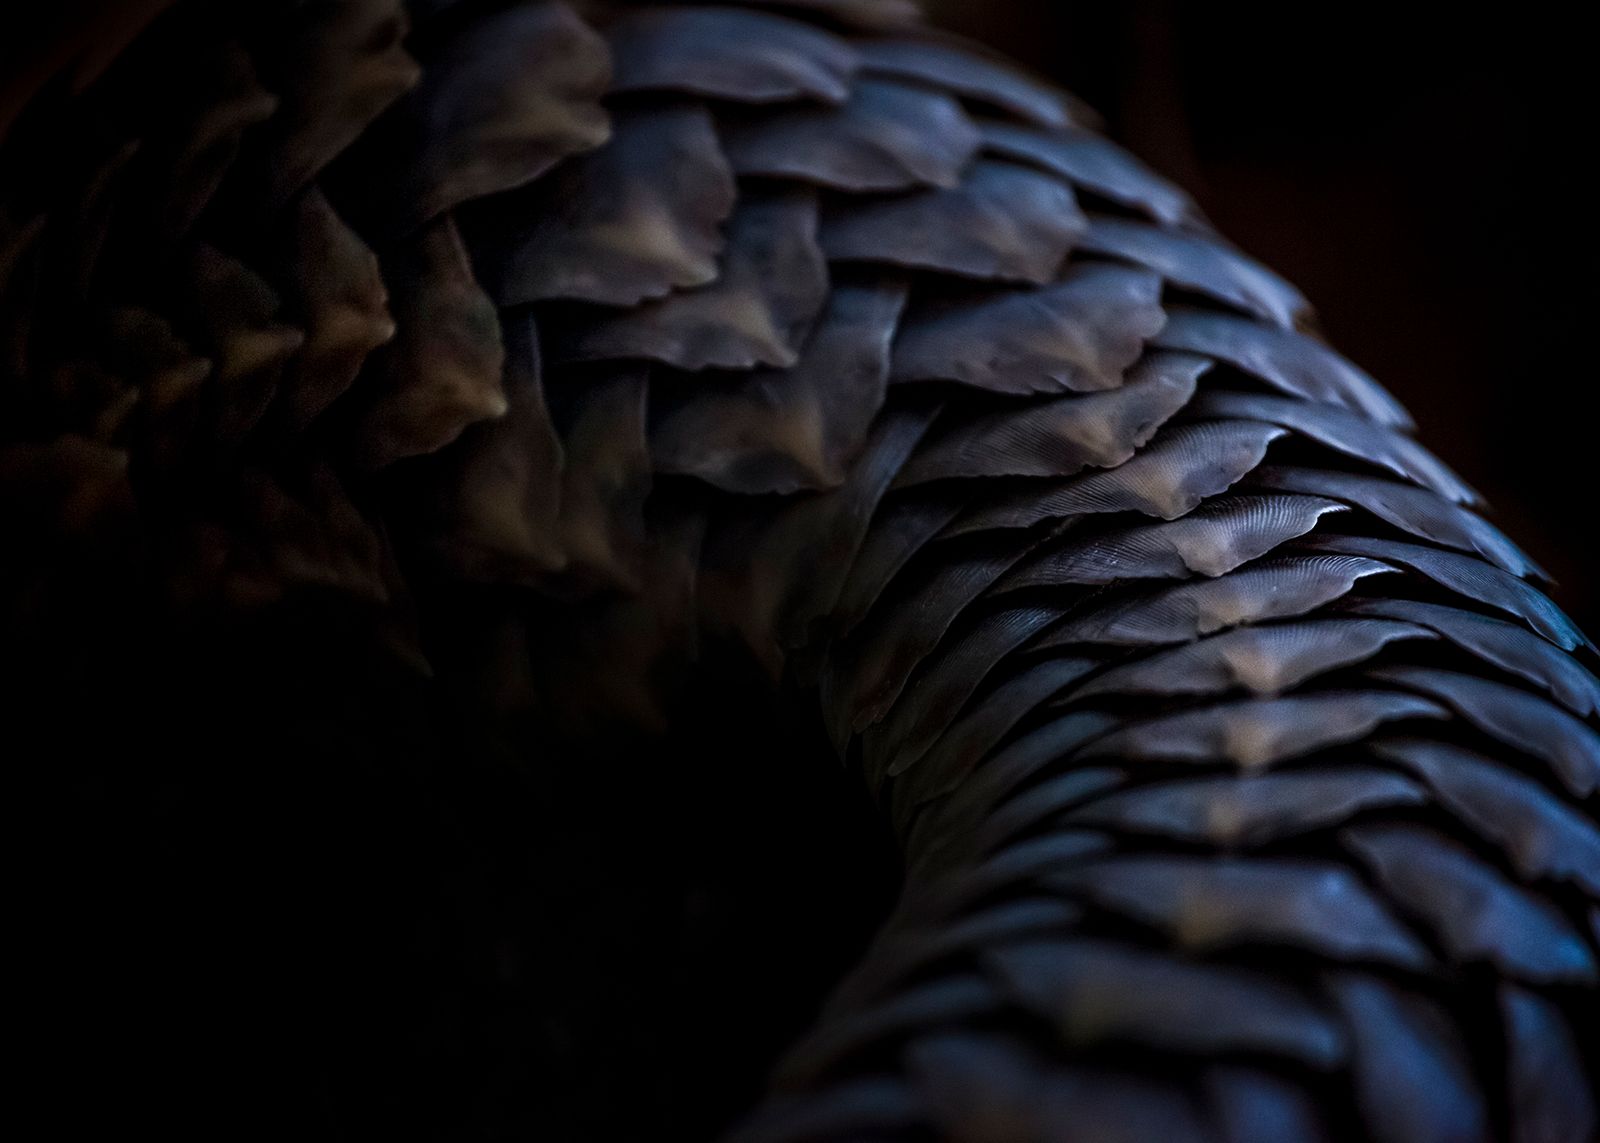 © Neil Aldridge - Image from the Pangolin Protectors photography project